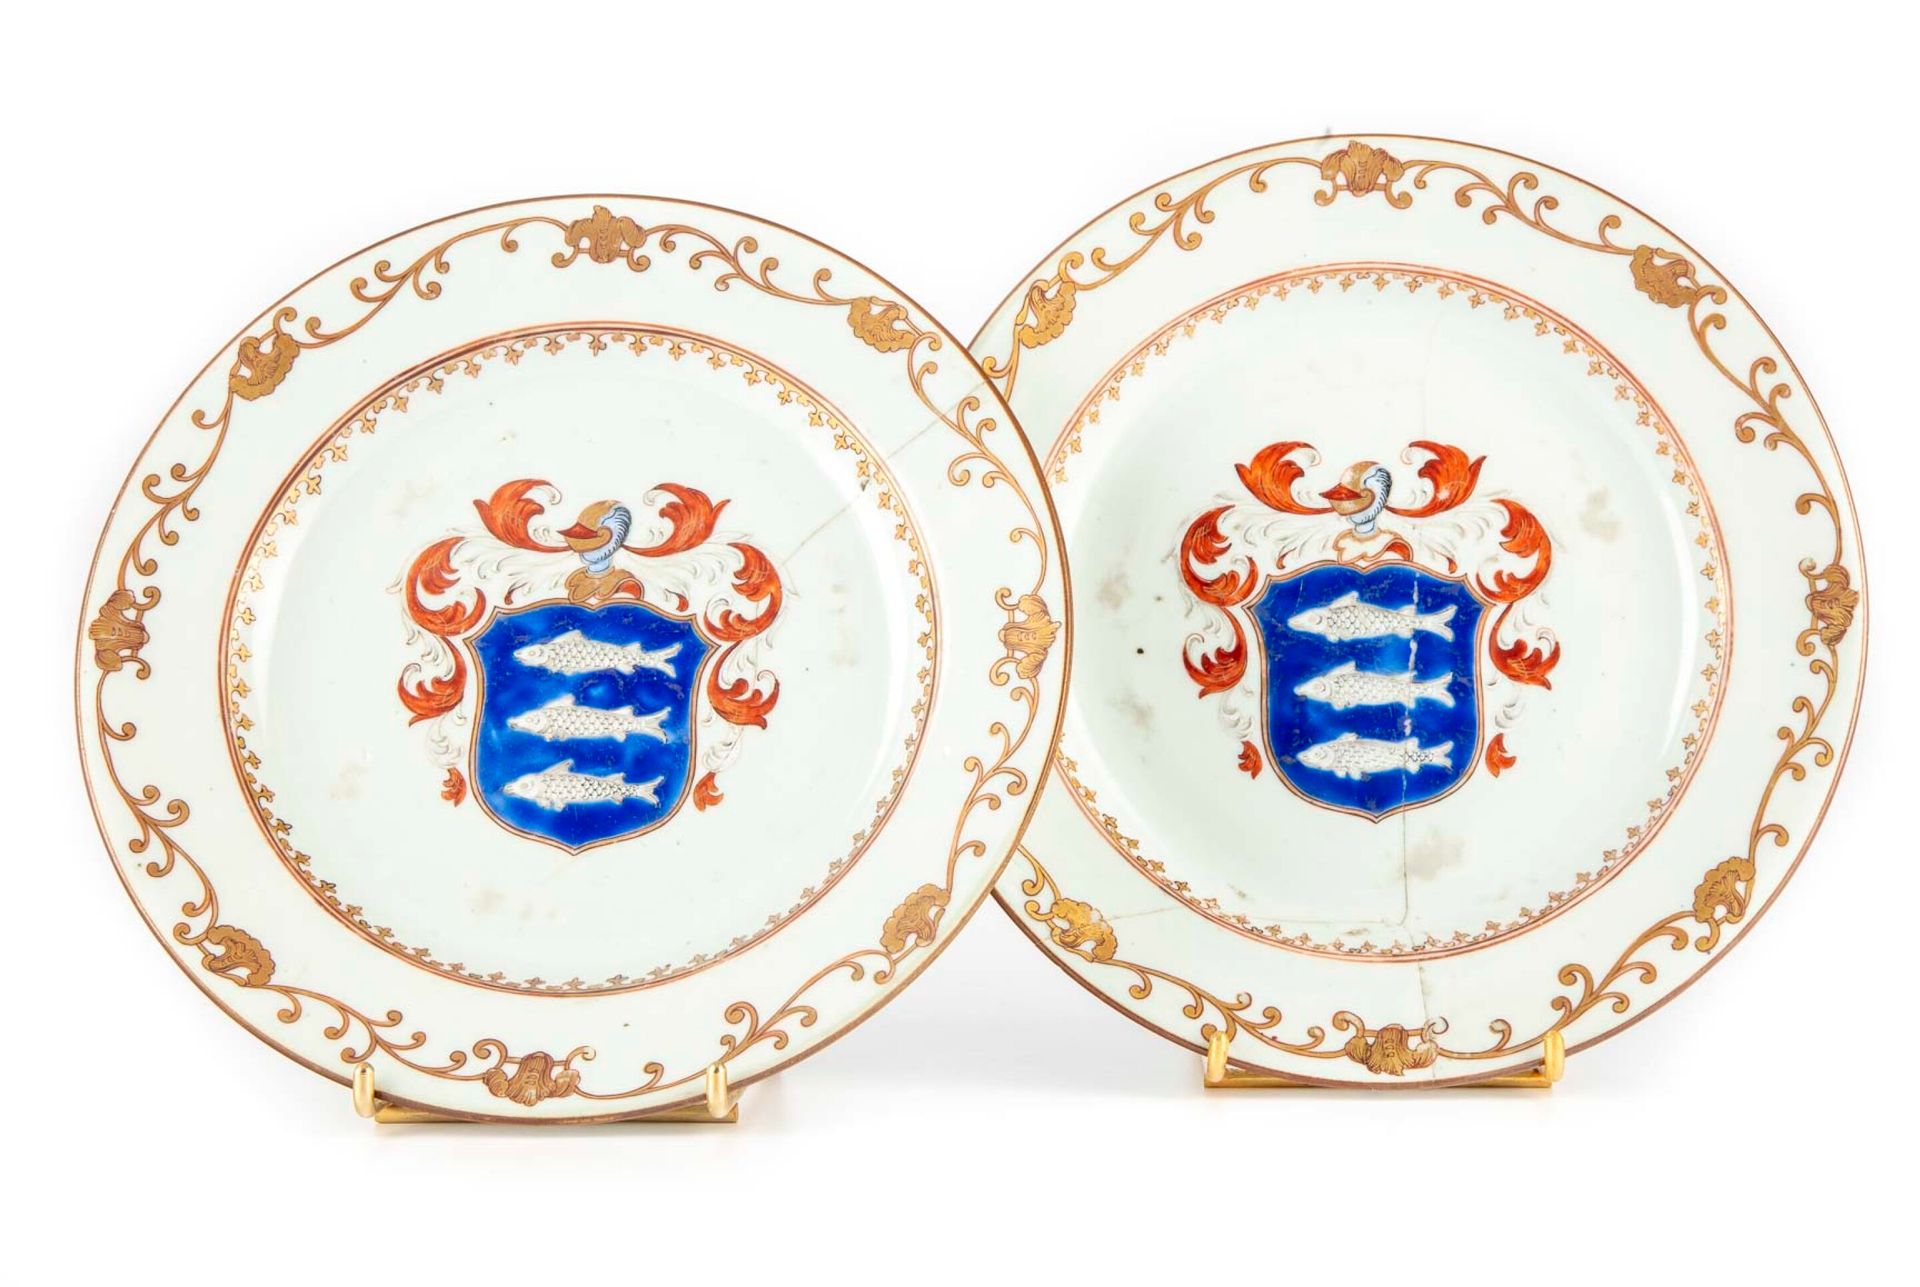 CHINE CHINA

Two porcelain plates with polychrome decoration of coats of arms in&hellip;